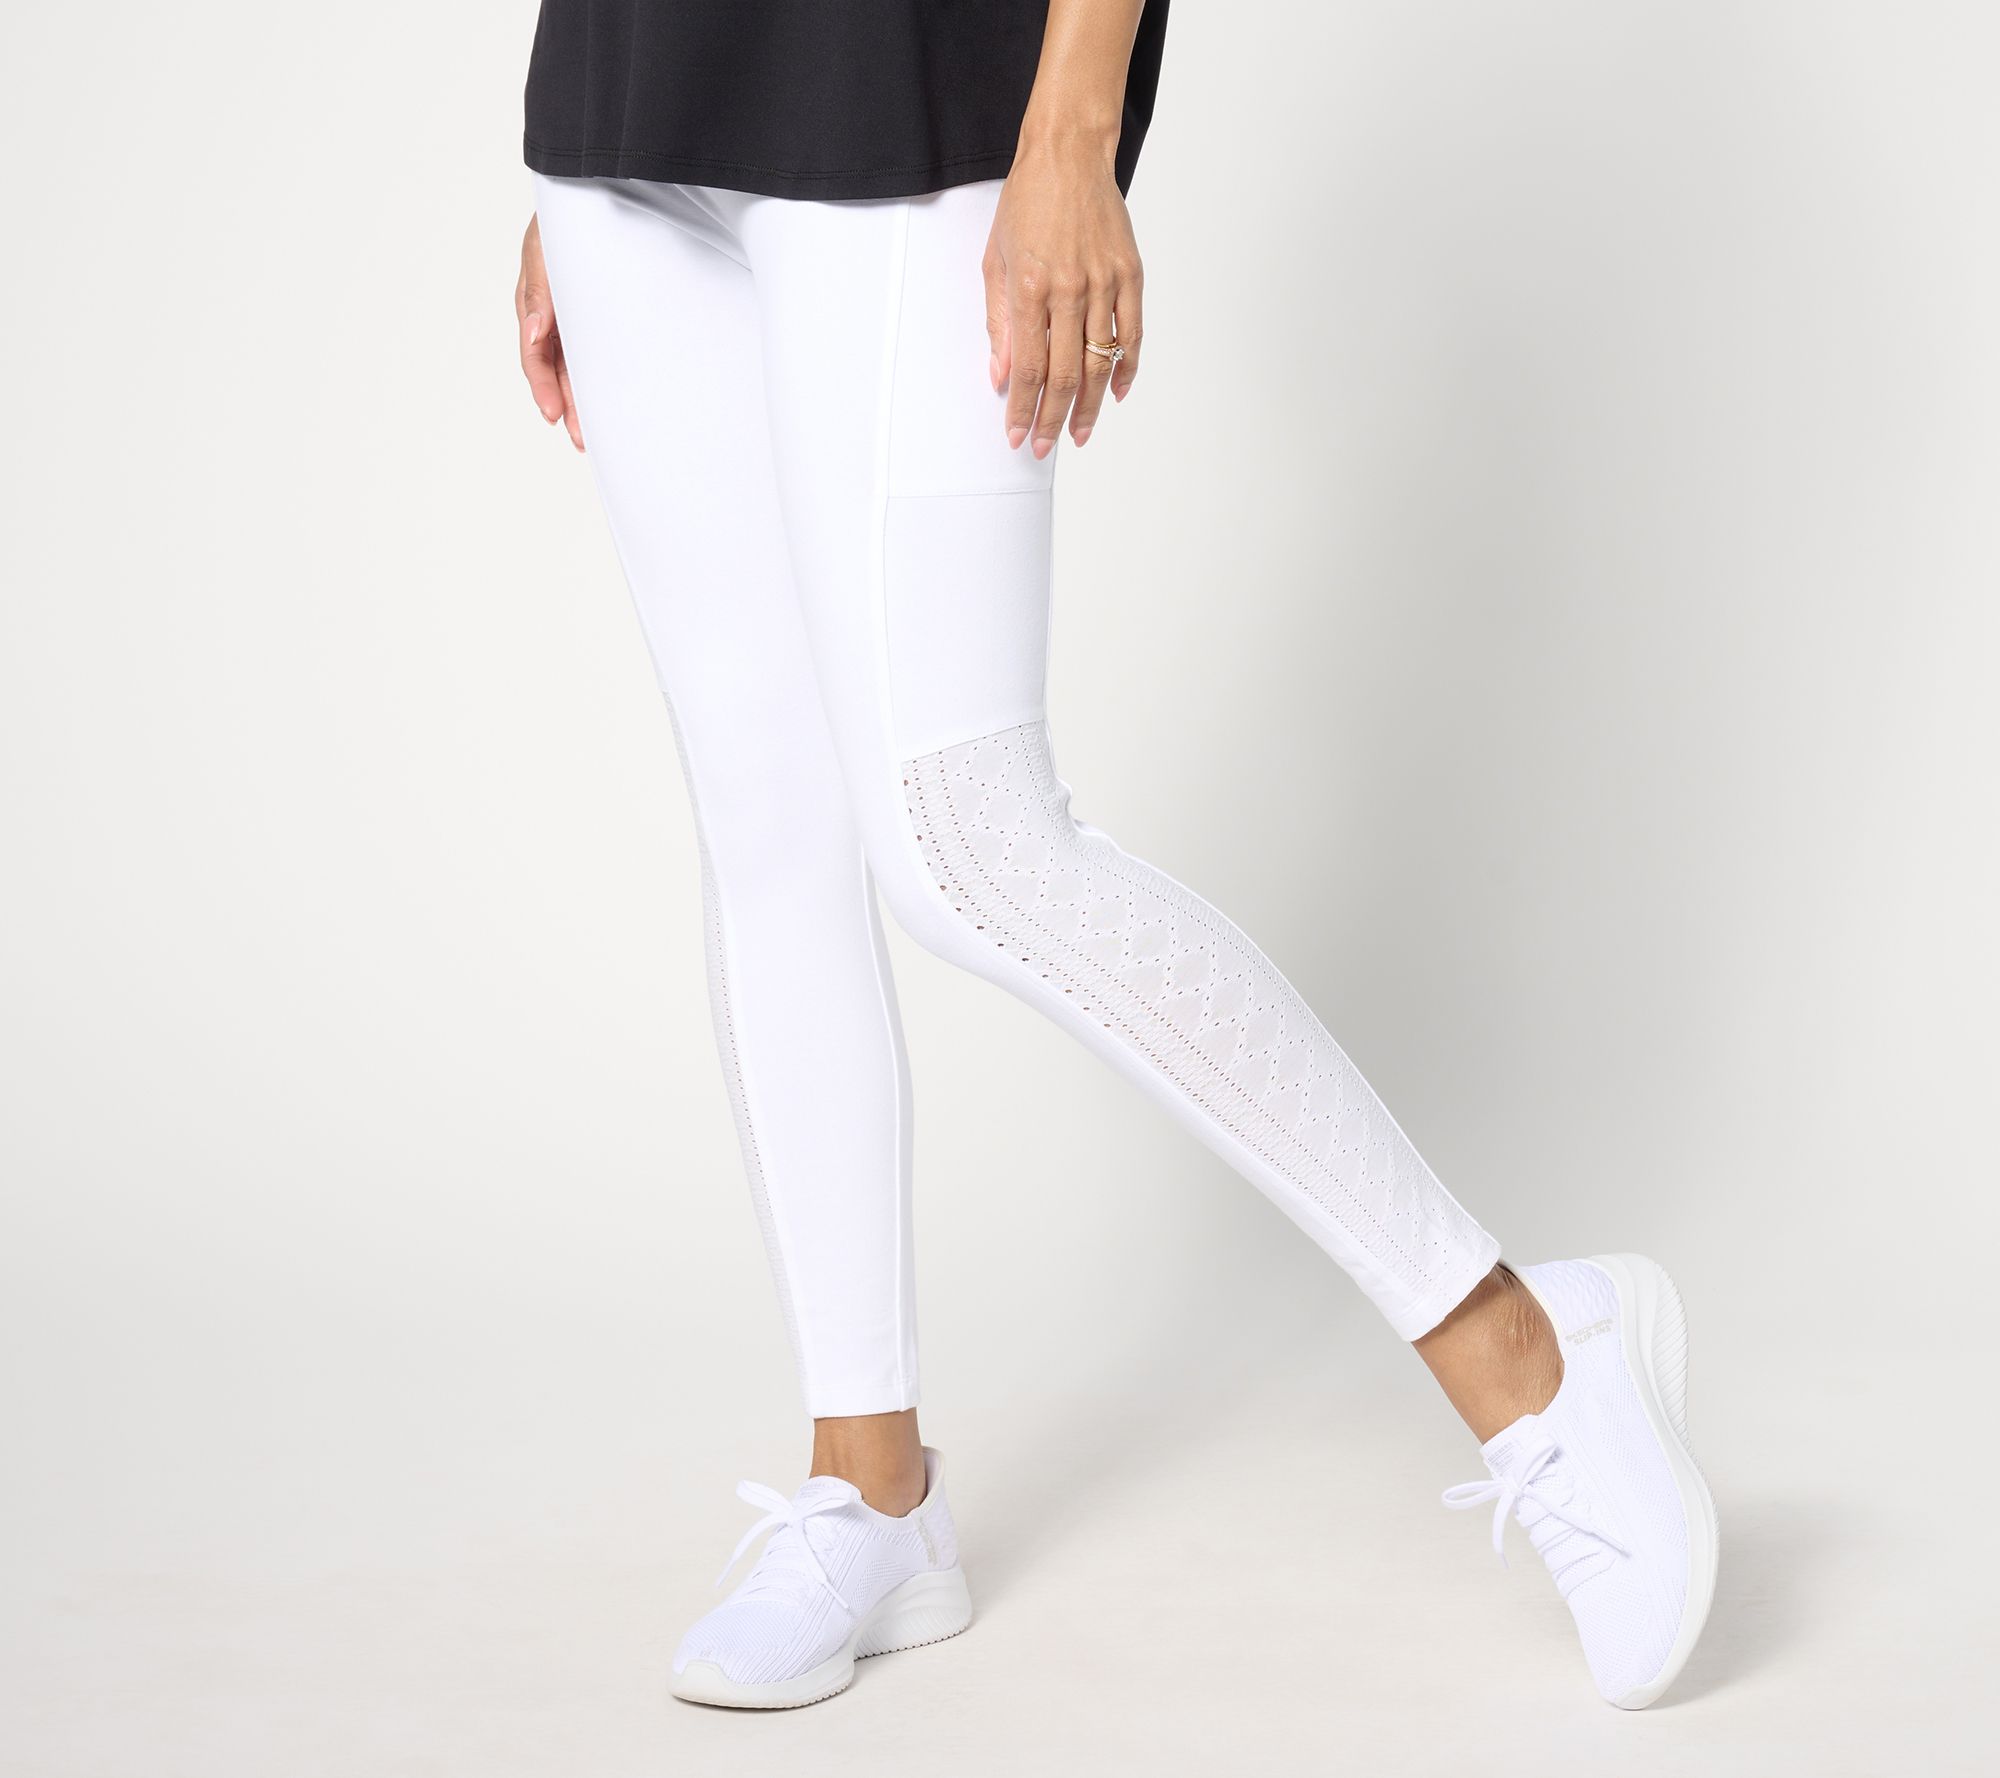 Petites Exercise Pants for Women for sale